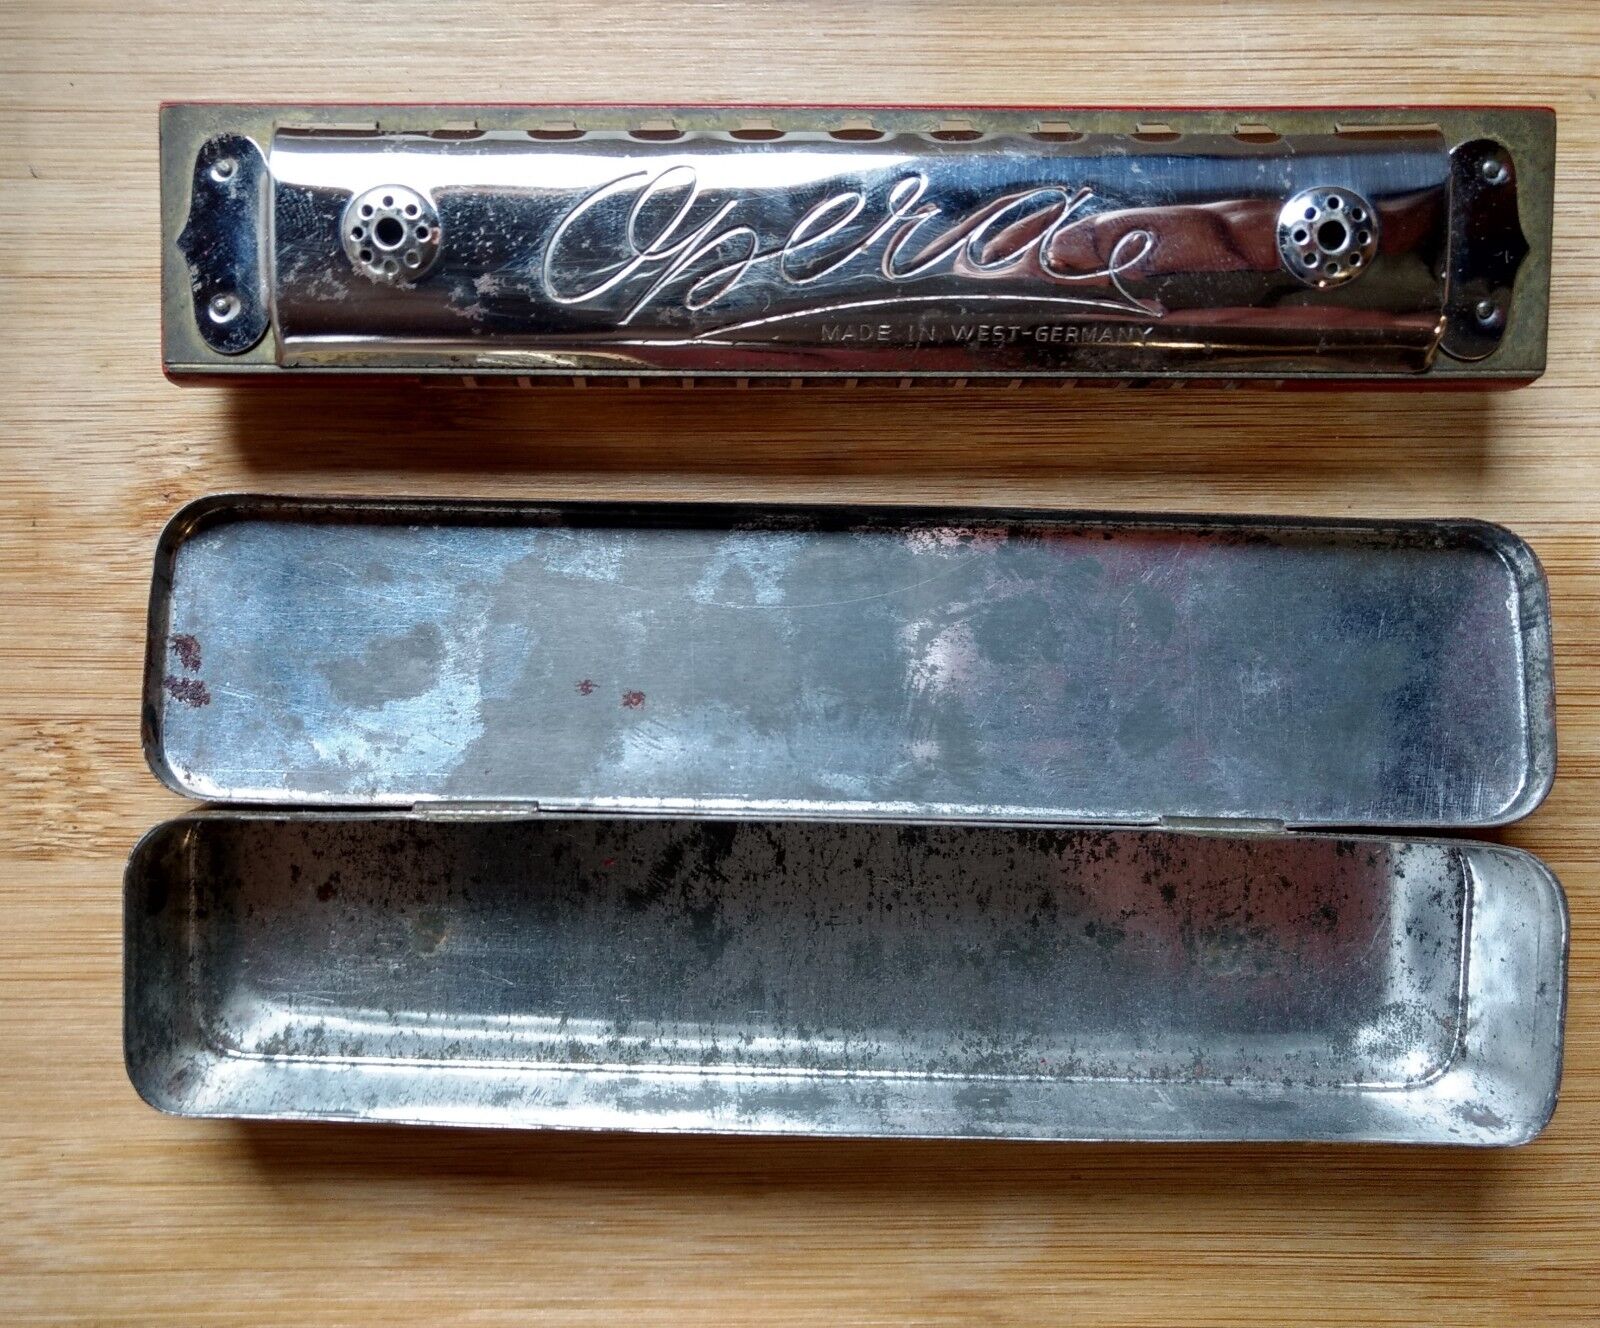 Harmonica by Opera in Original Tin Case Vintage made in West Germany US Zone